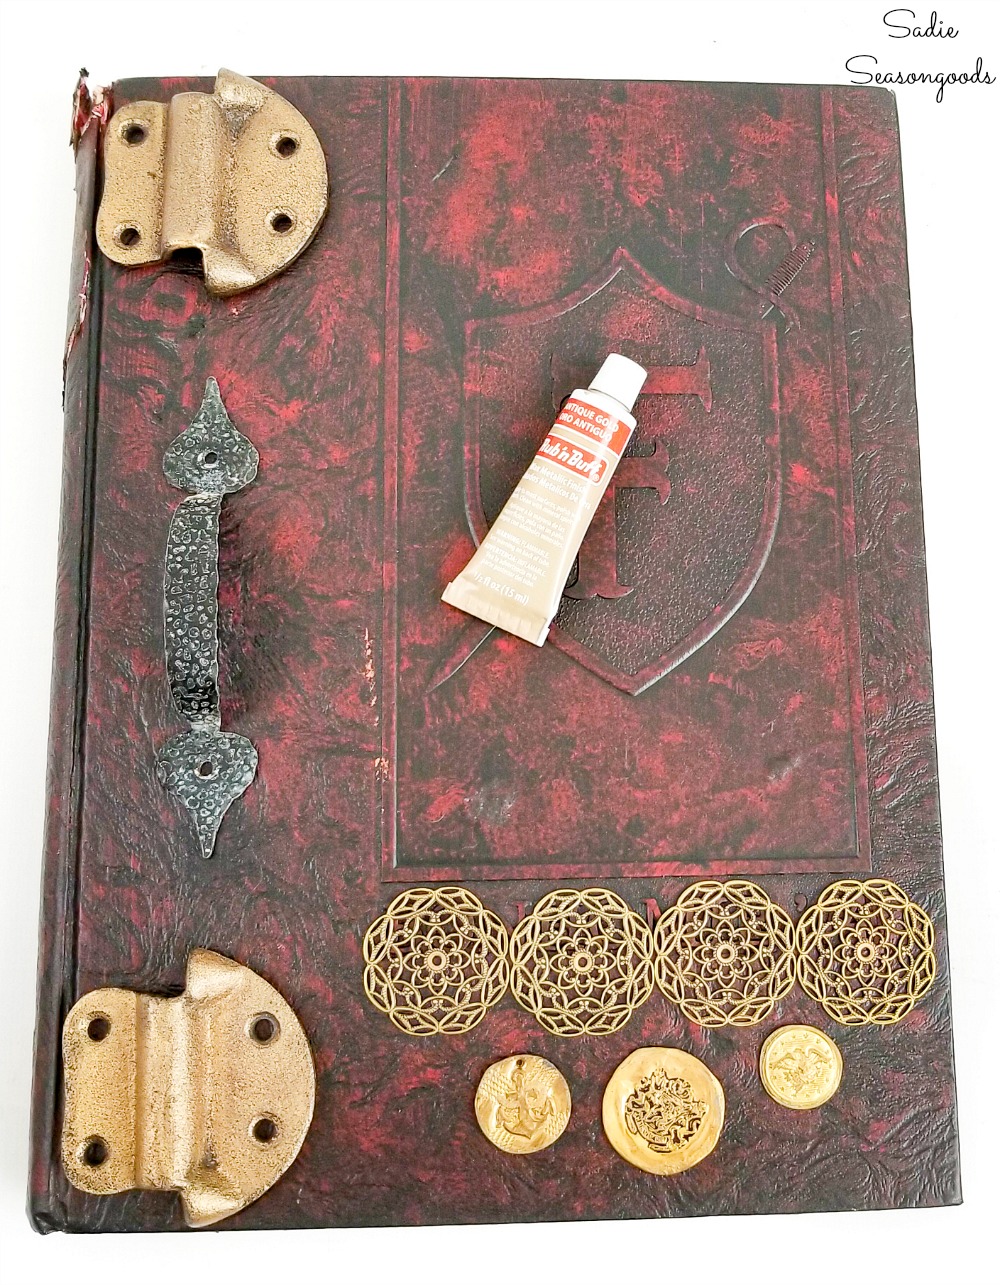 DIY spell book by upcycling a vintage yearbook